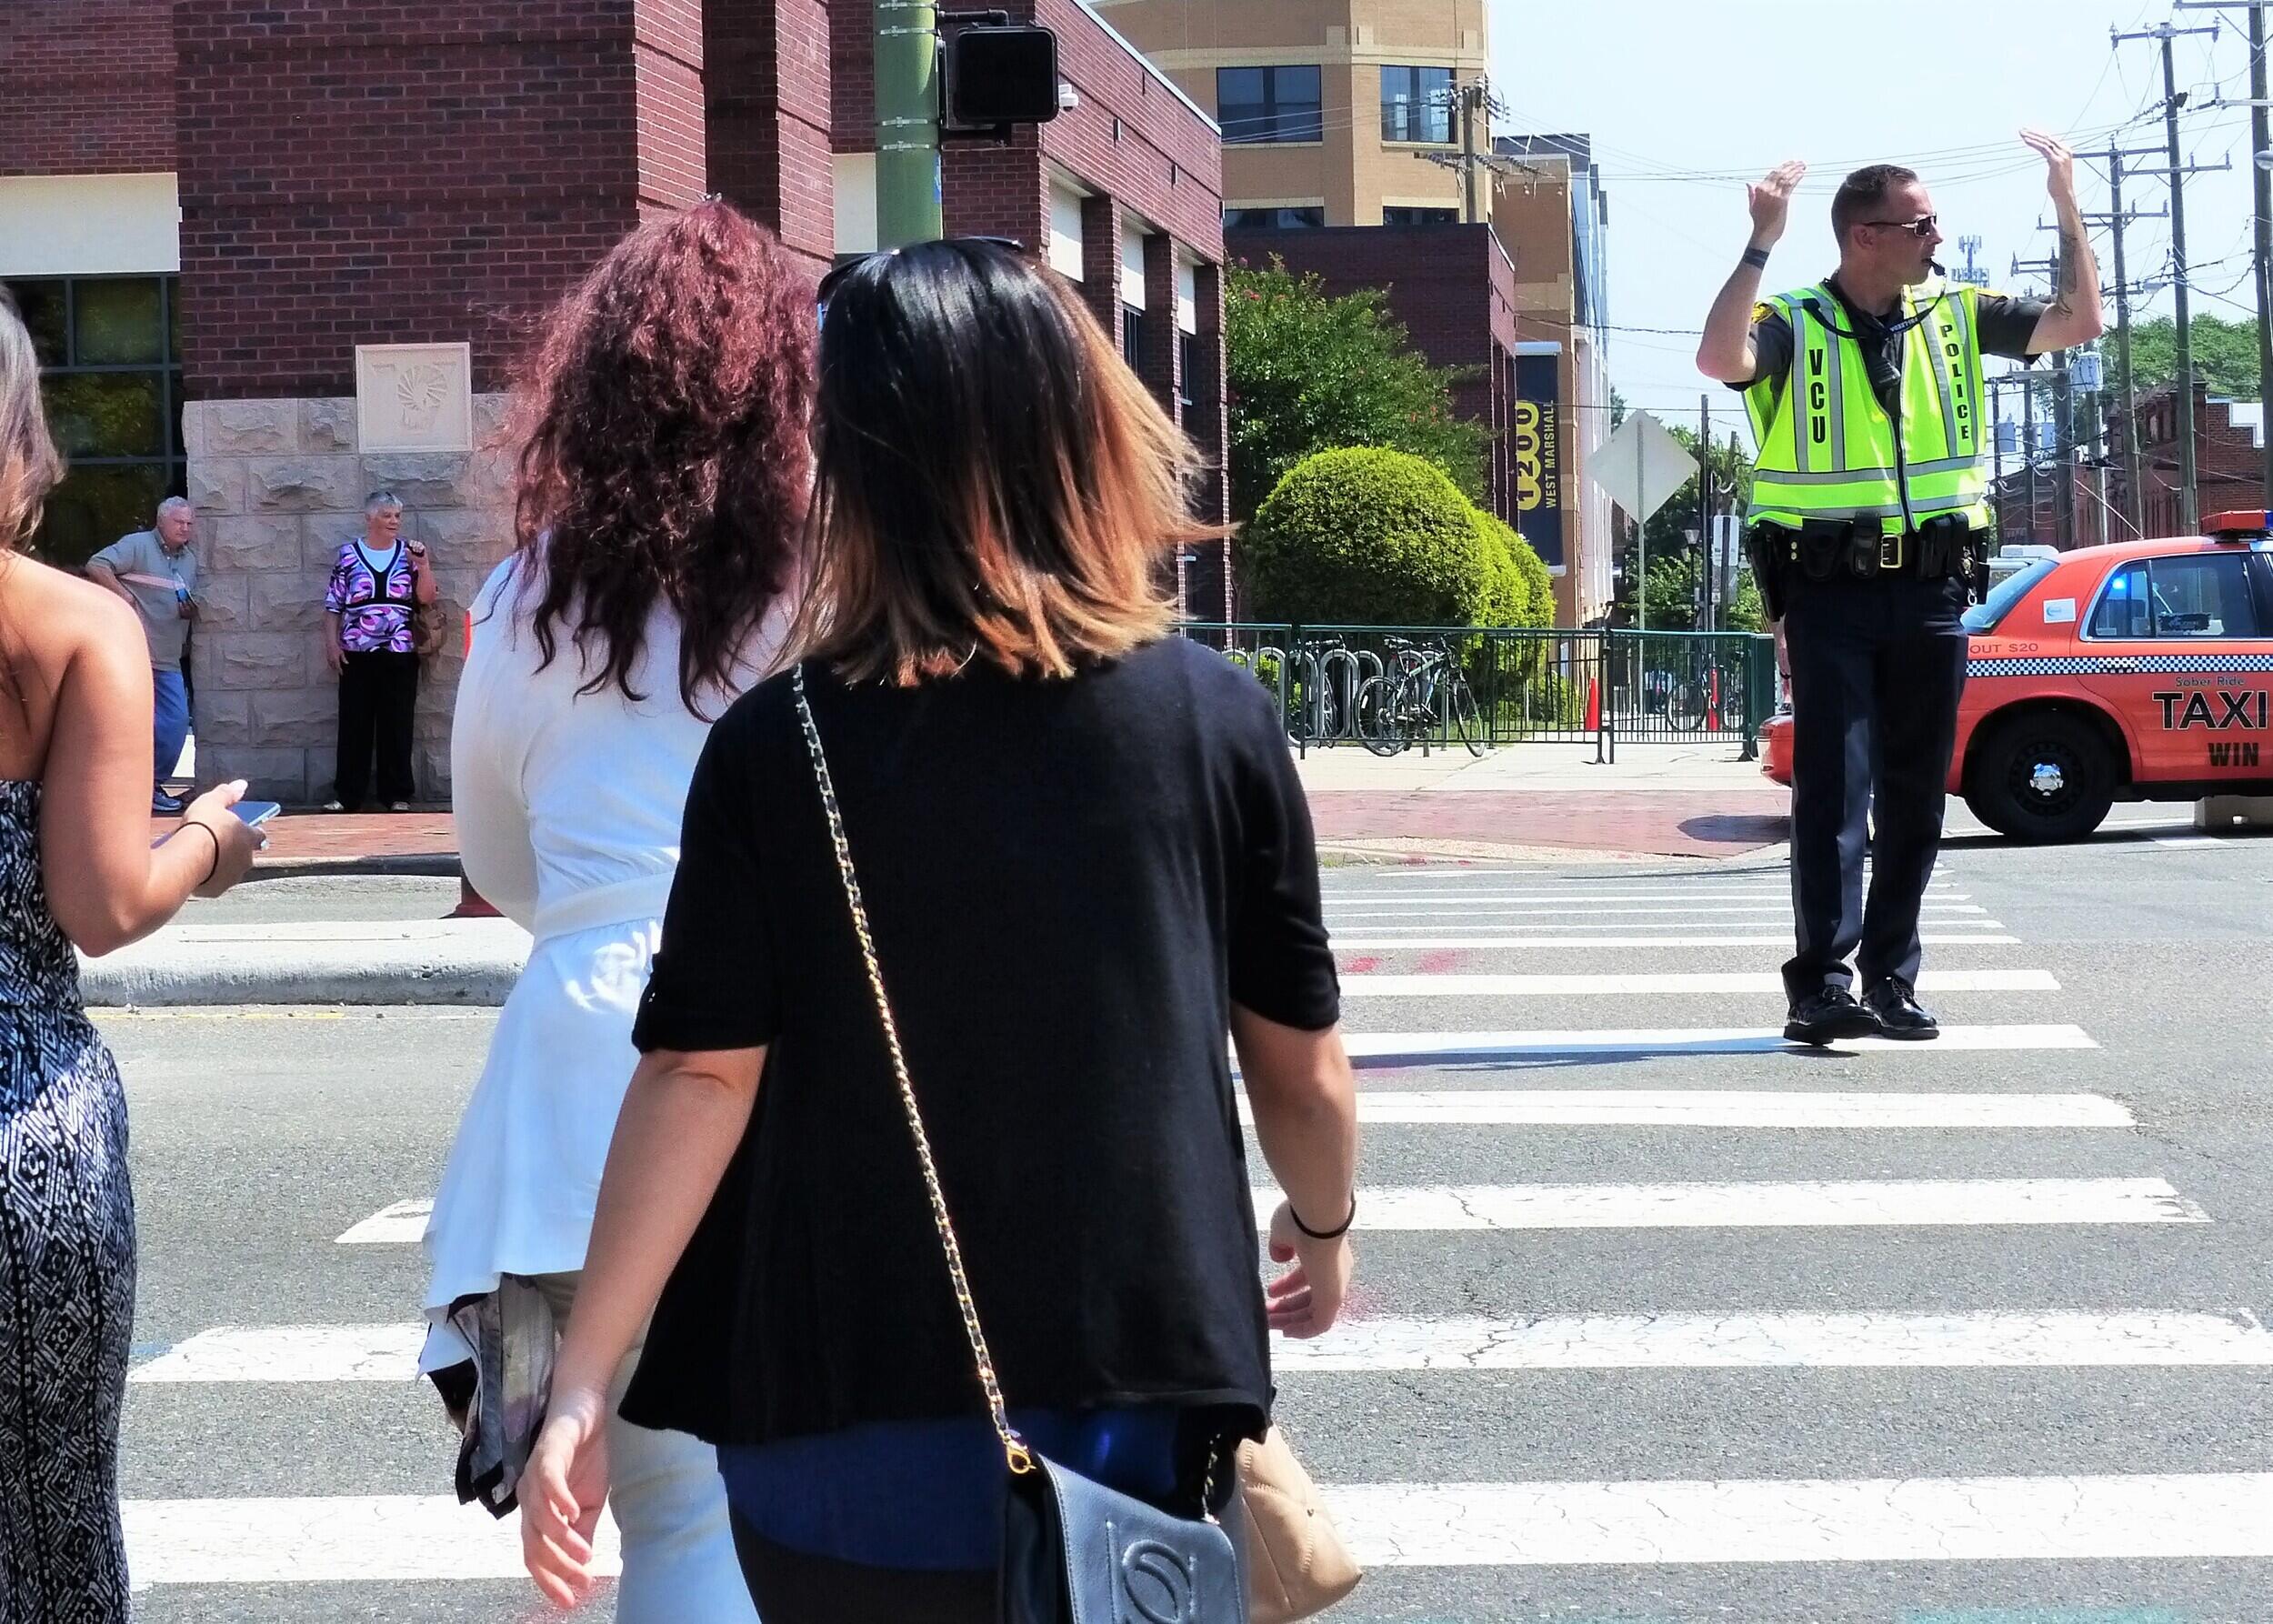 VCU Police Sgt. Bryan Longest directs pedestrians to cross Broad Street during high school graduations in June 2017. (File photo)

